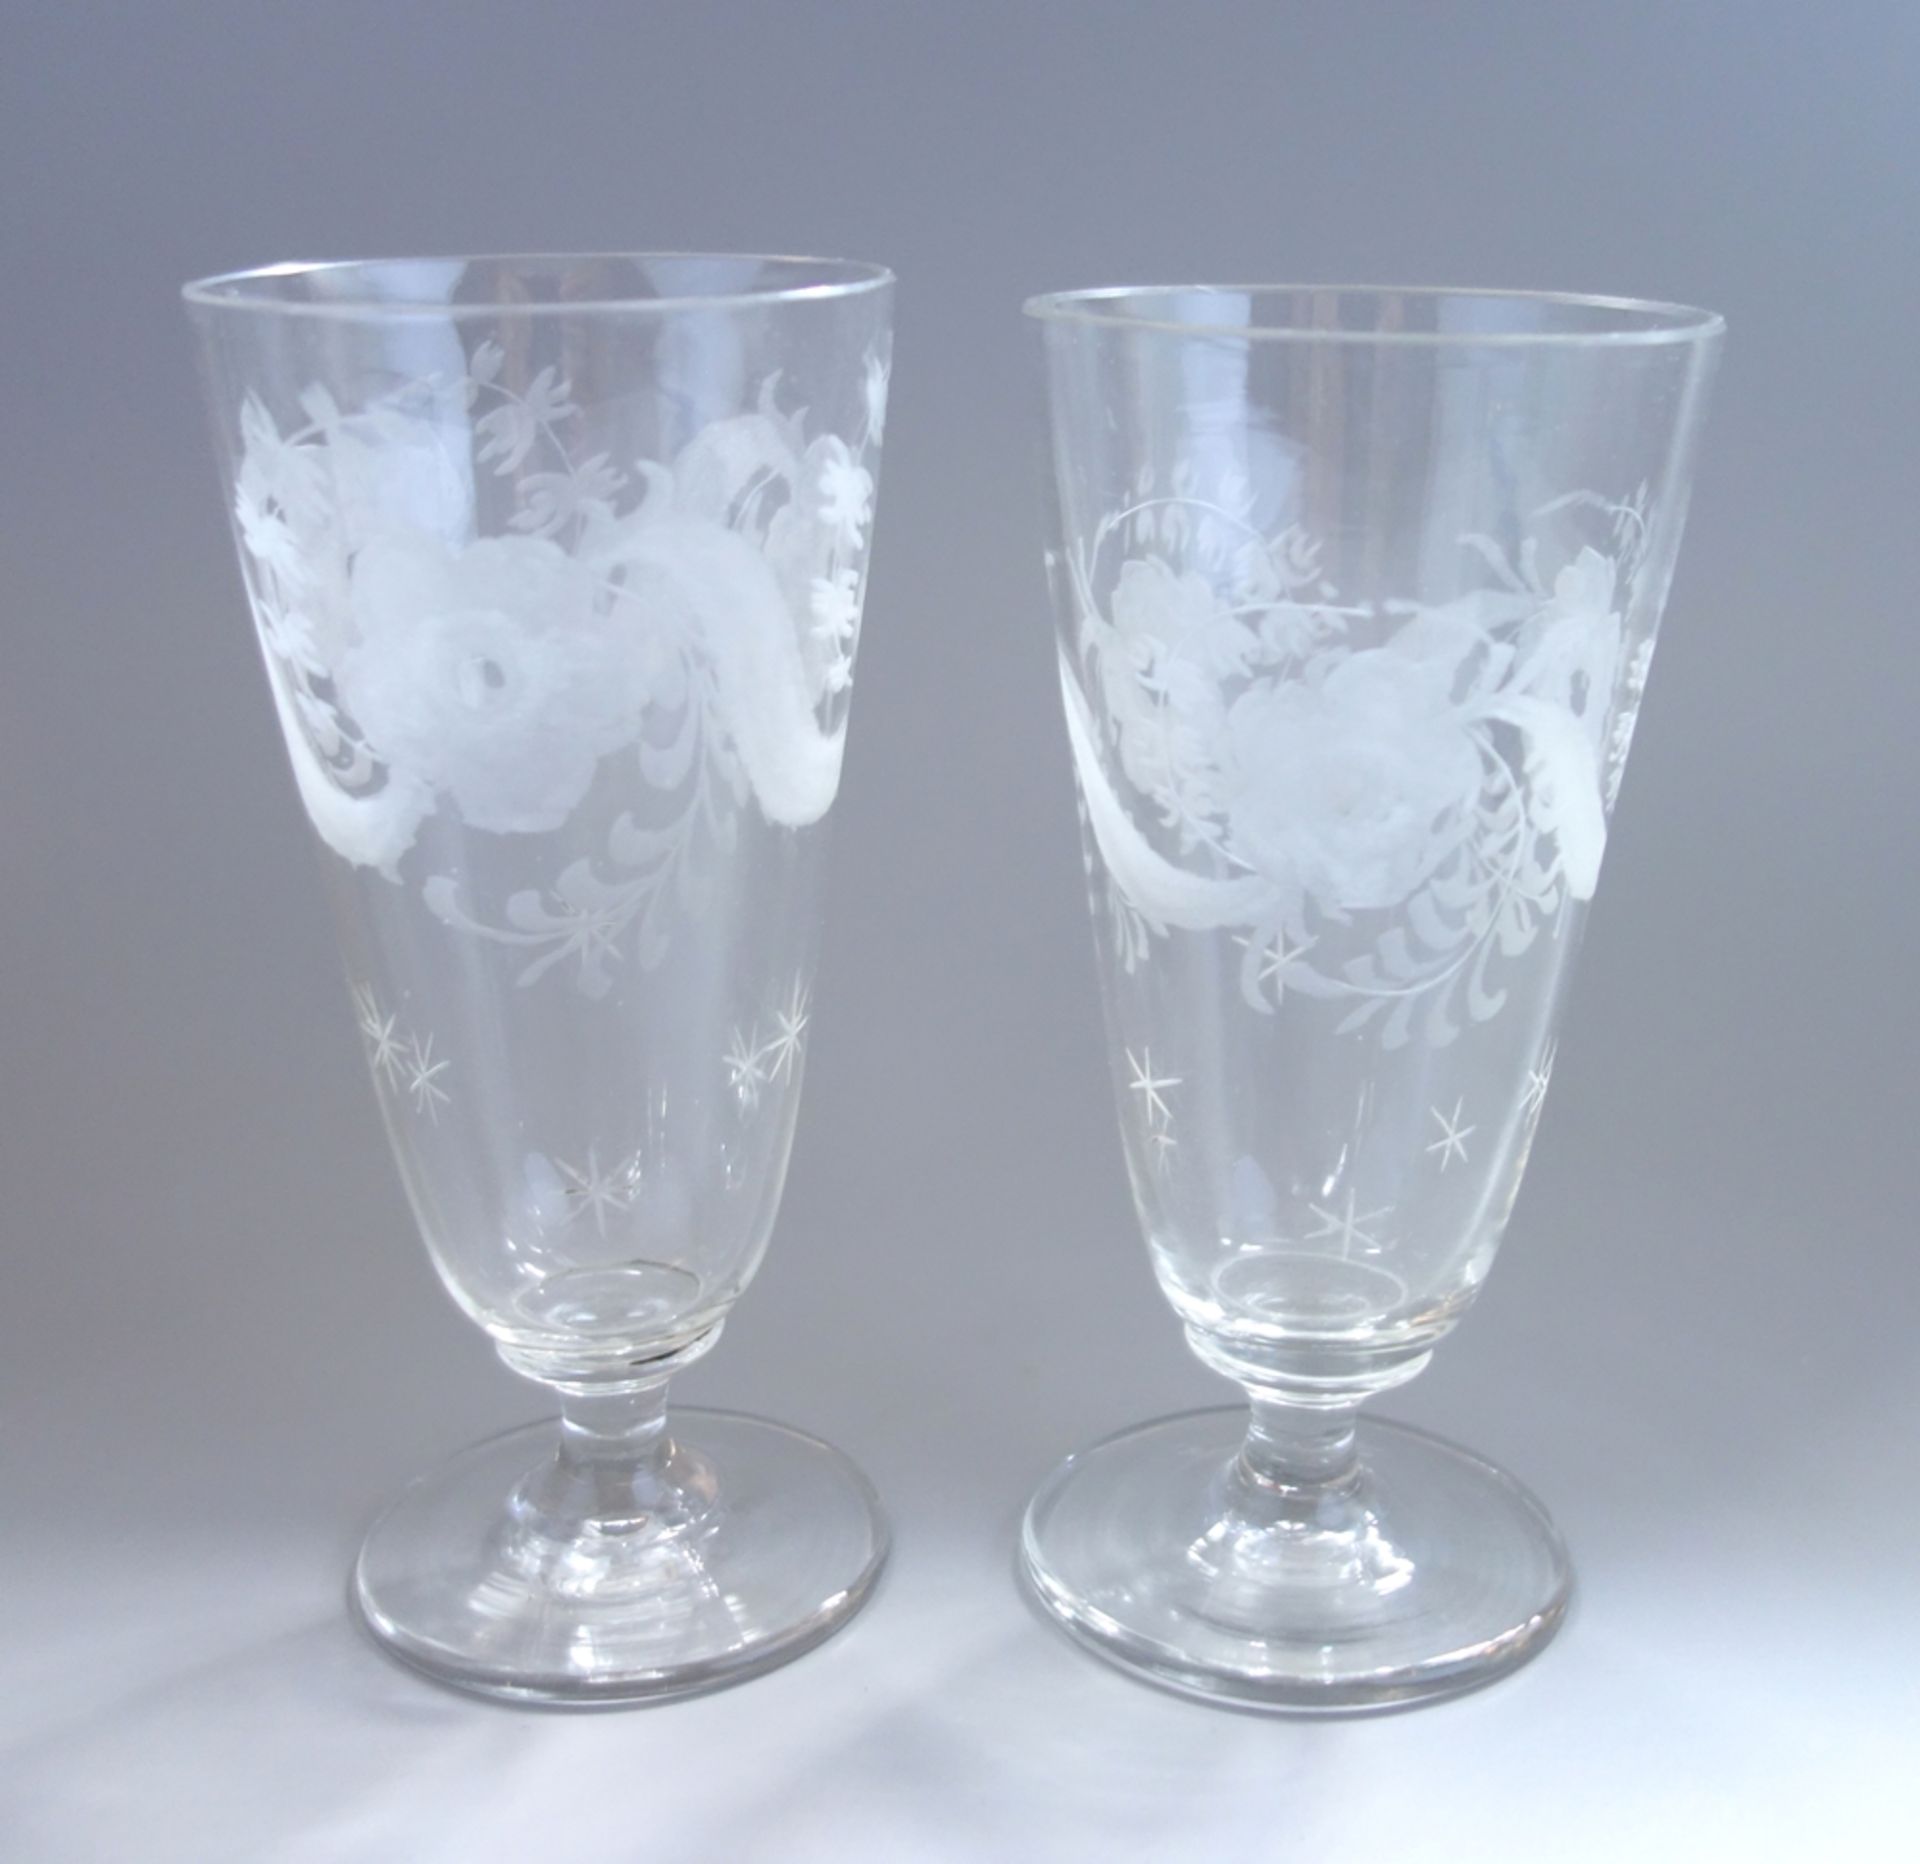 Pair of glasses with floral engraving, c.1860